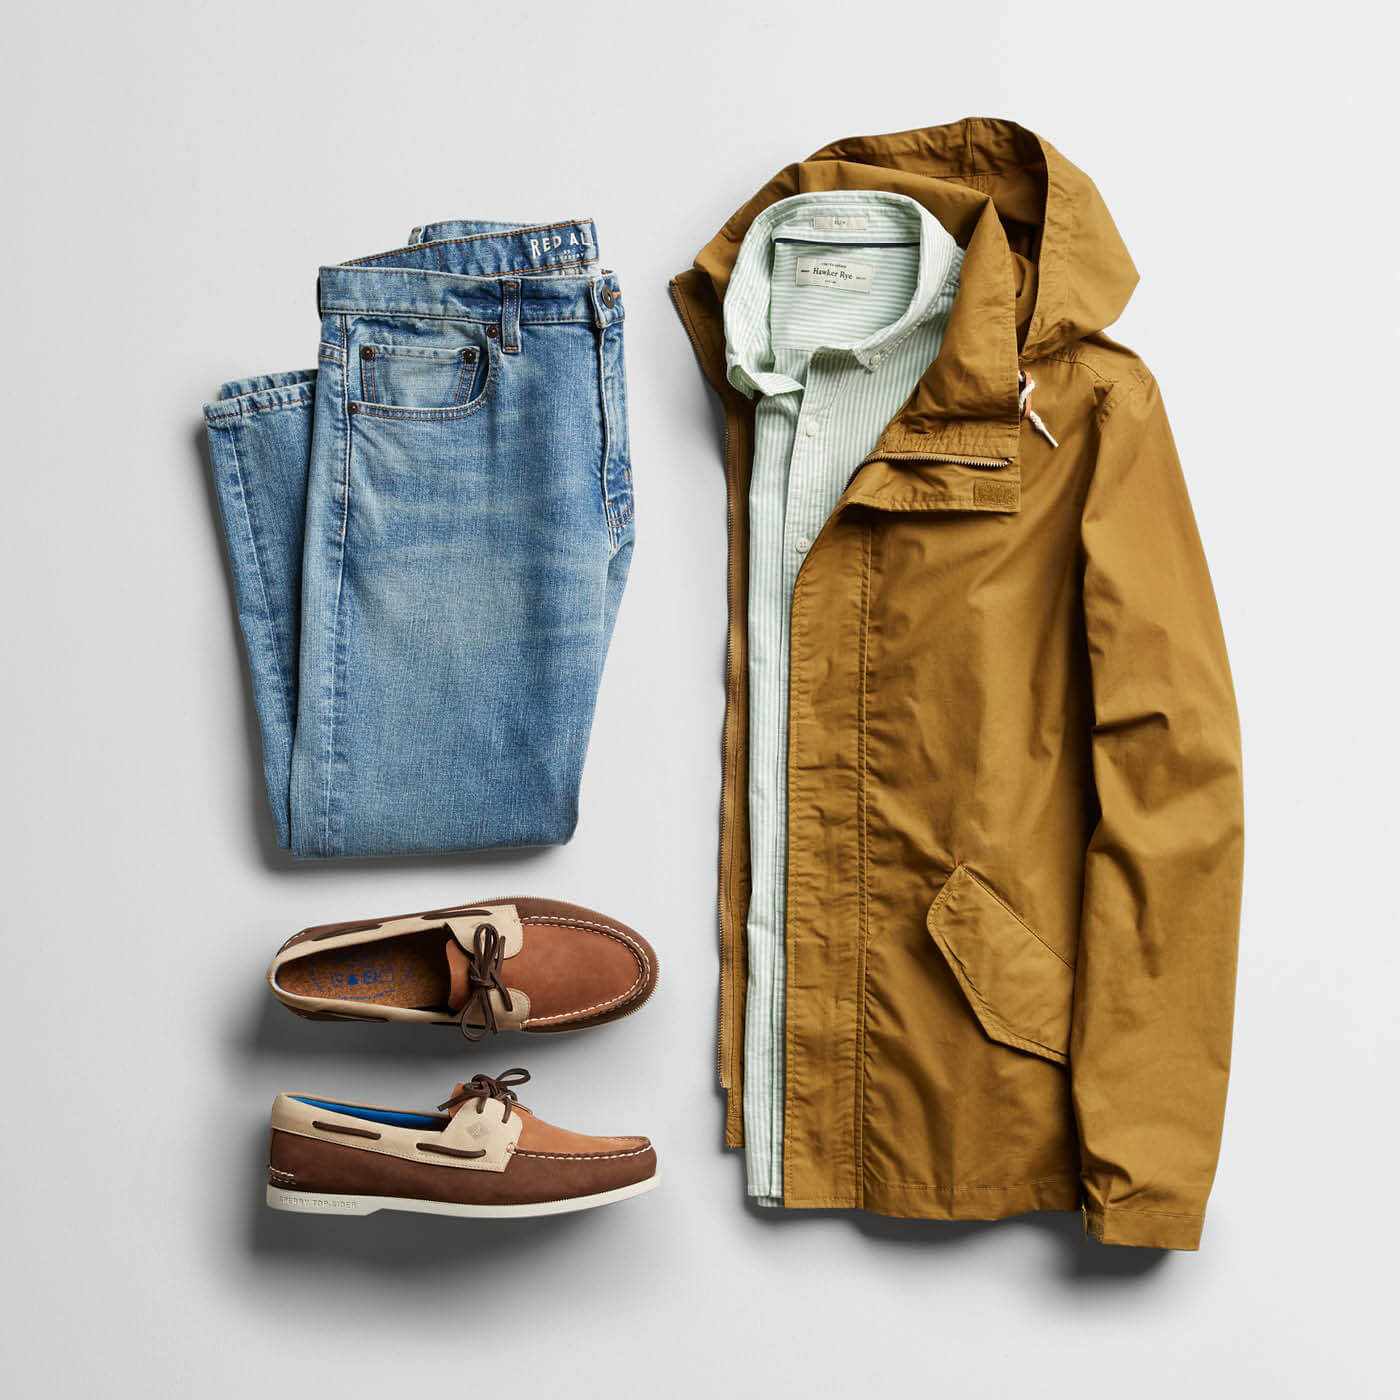 khaki jacket, jeans and boat shoes